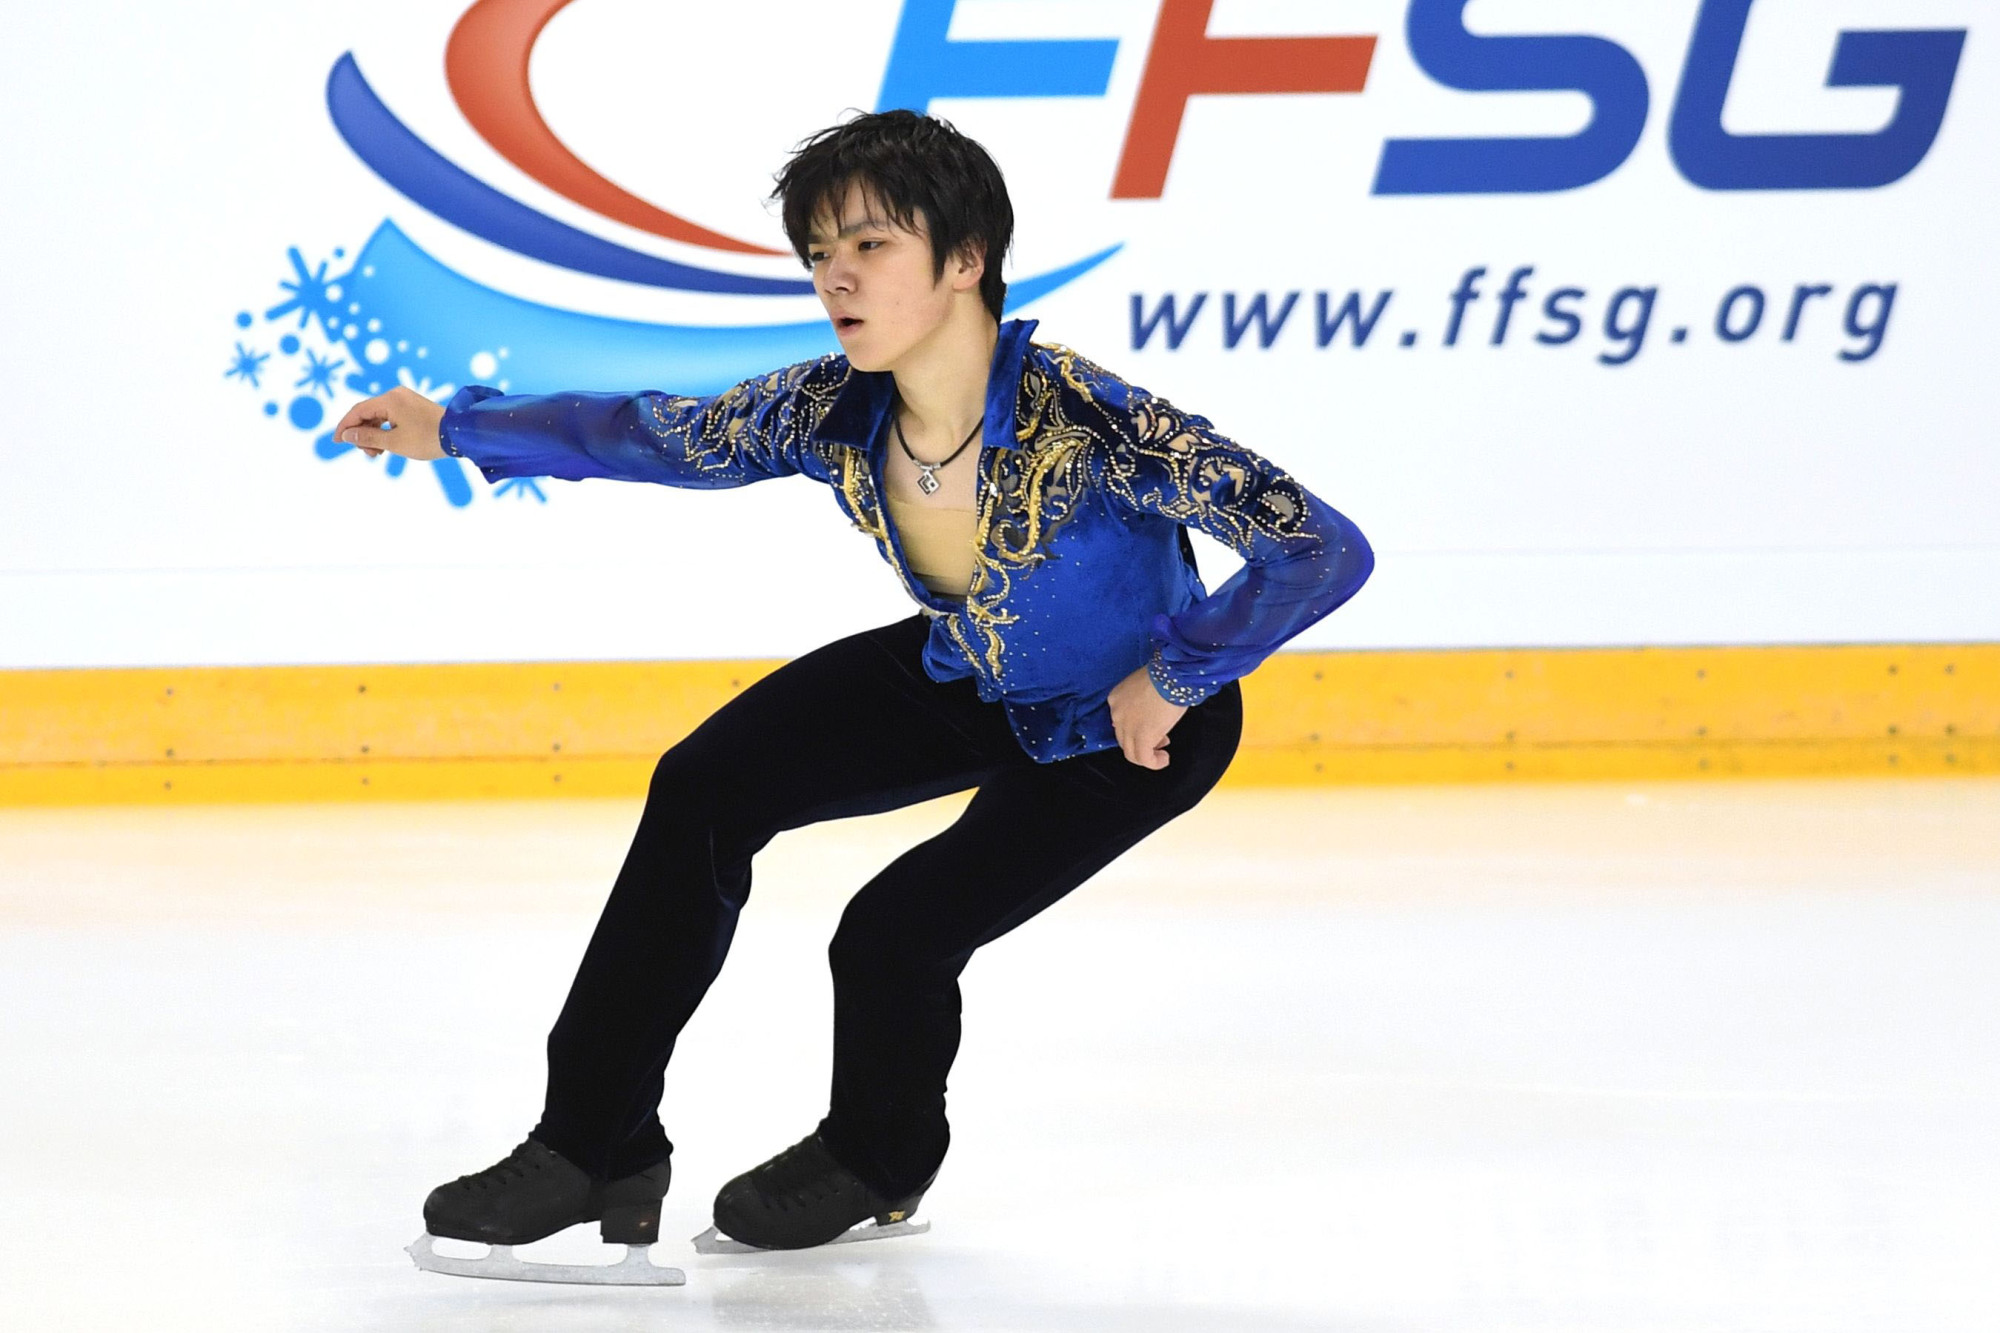 Shoma Uno fell in both the short program and free skate at the Internationaux de France in Grenoble last week but still qualified for next month's Grand Prix Final in Nagoya. | AFP-JIJI